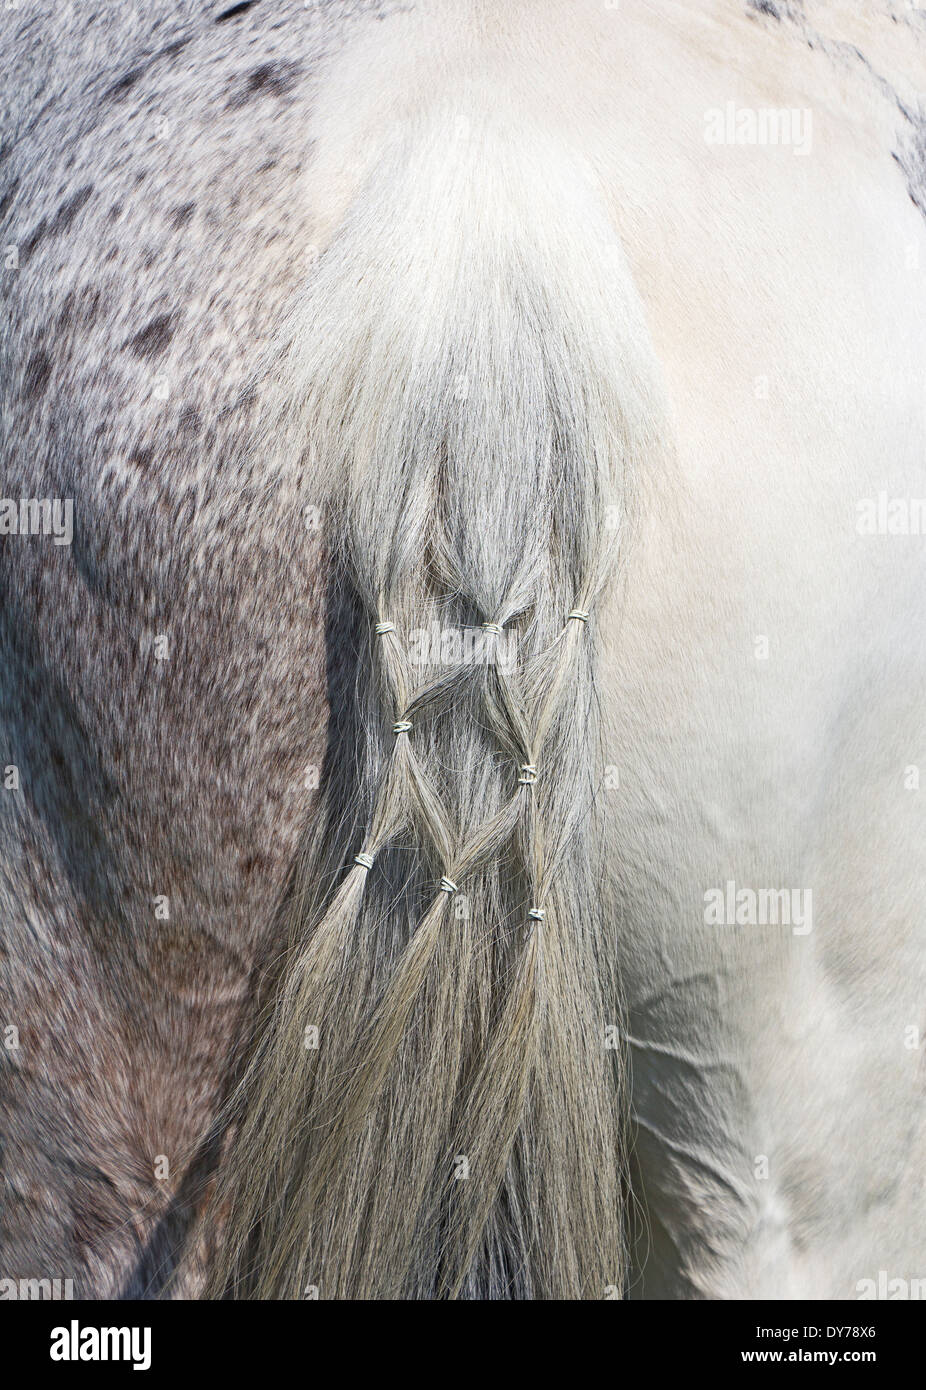 Braids on a white horse tail Stock Photo